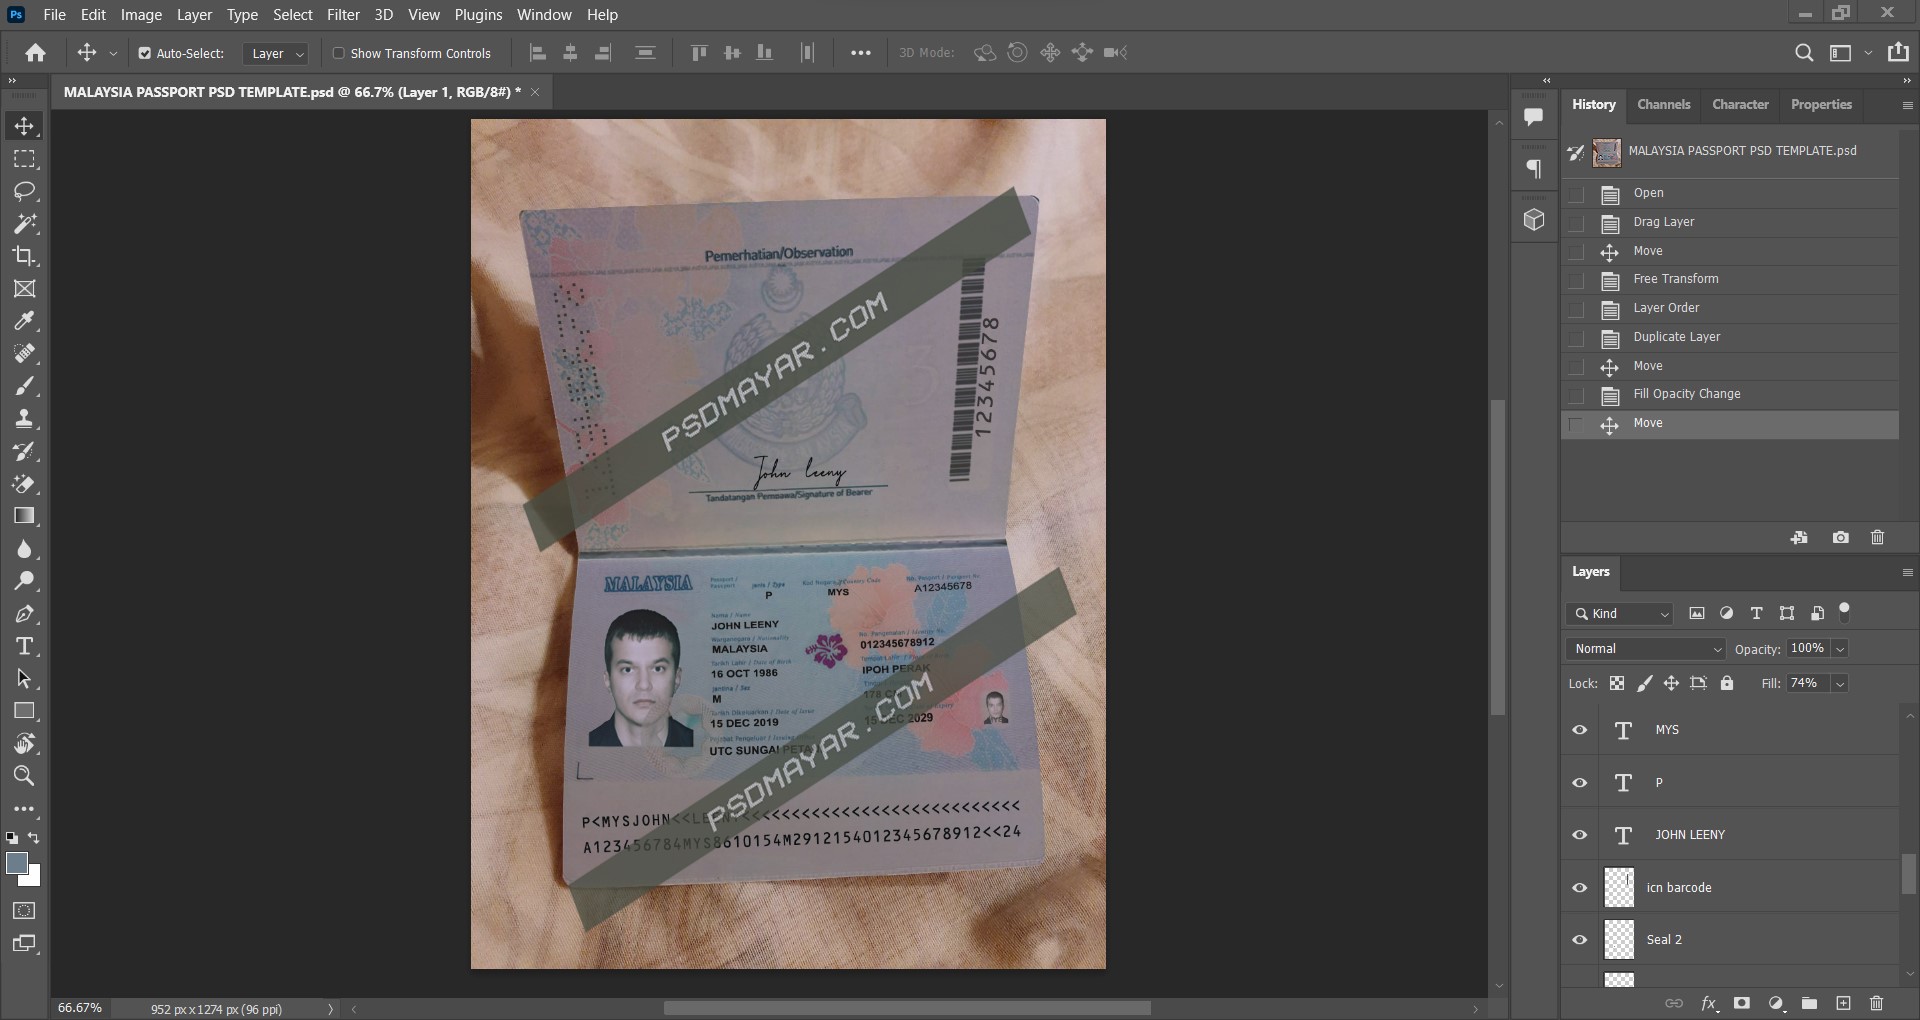 Malaysia passport PSD download scan and photo